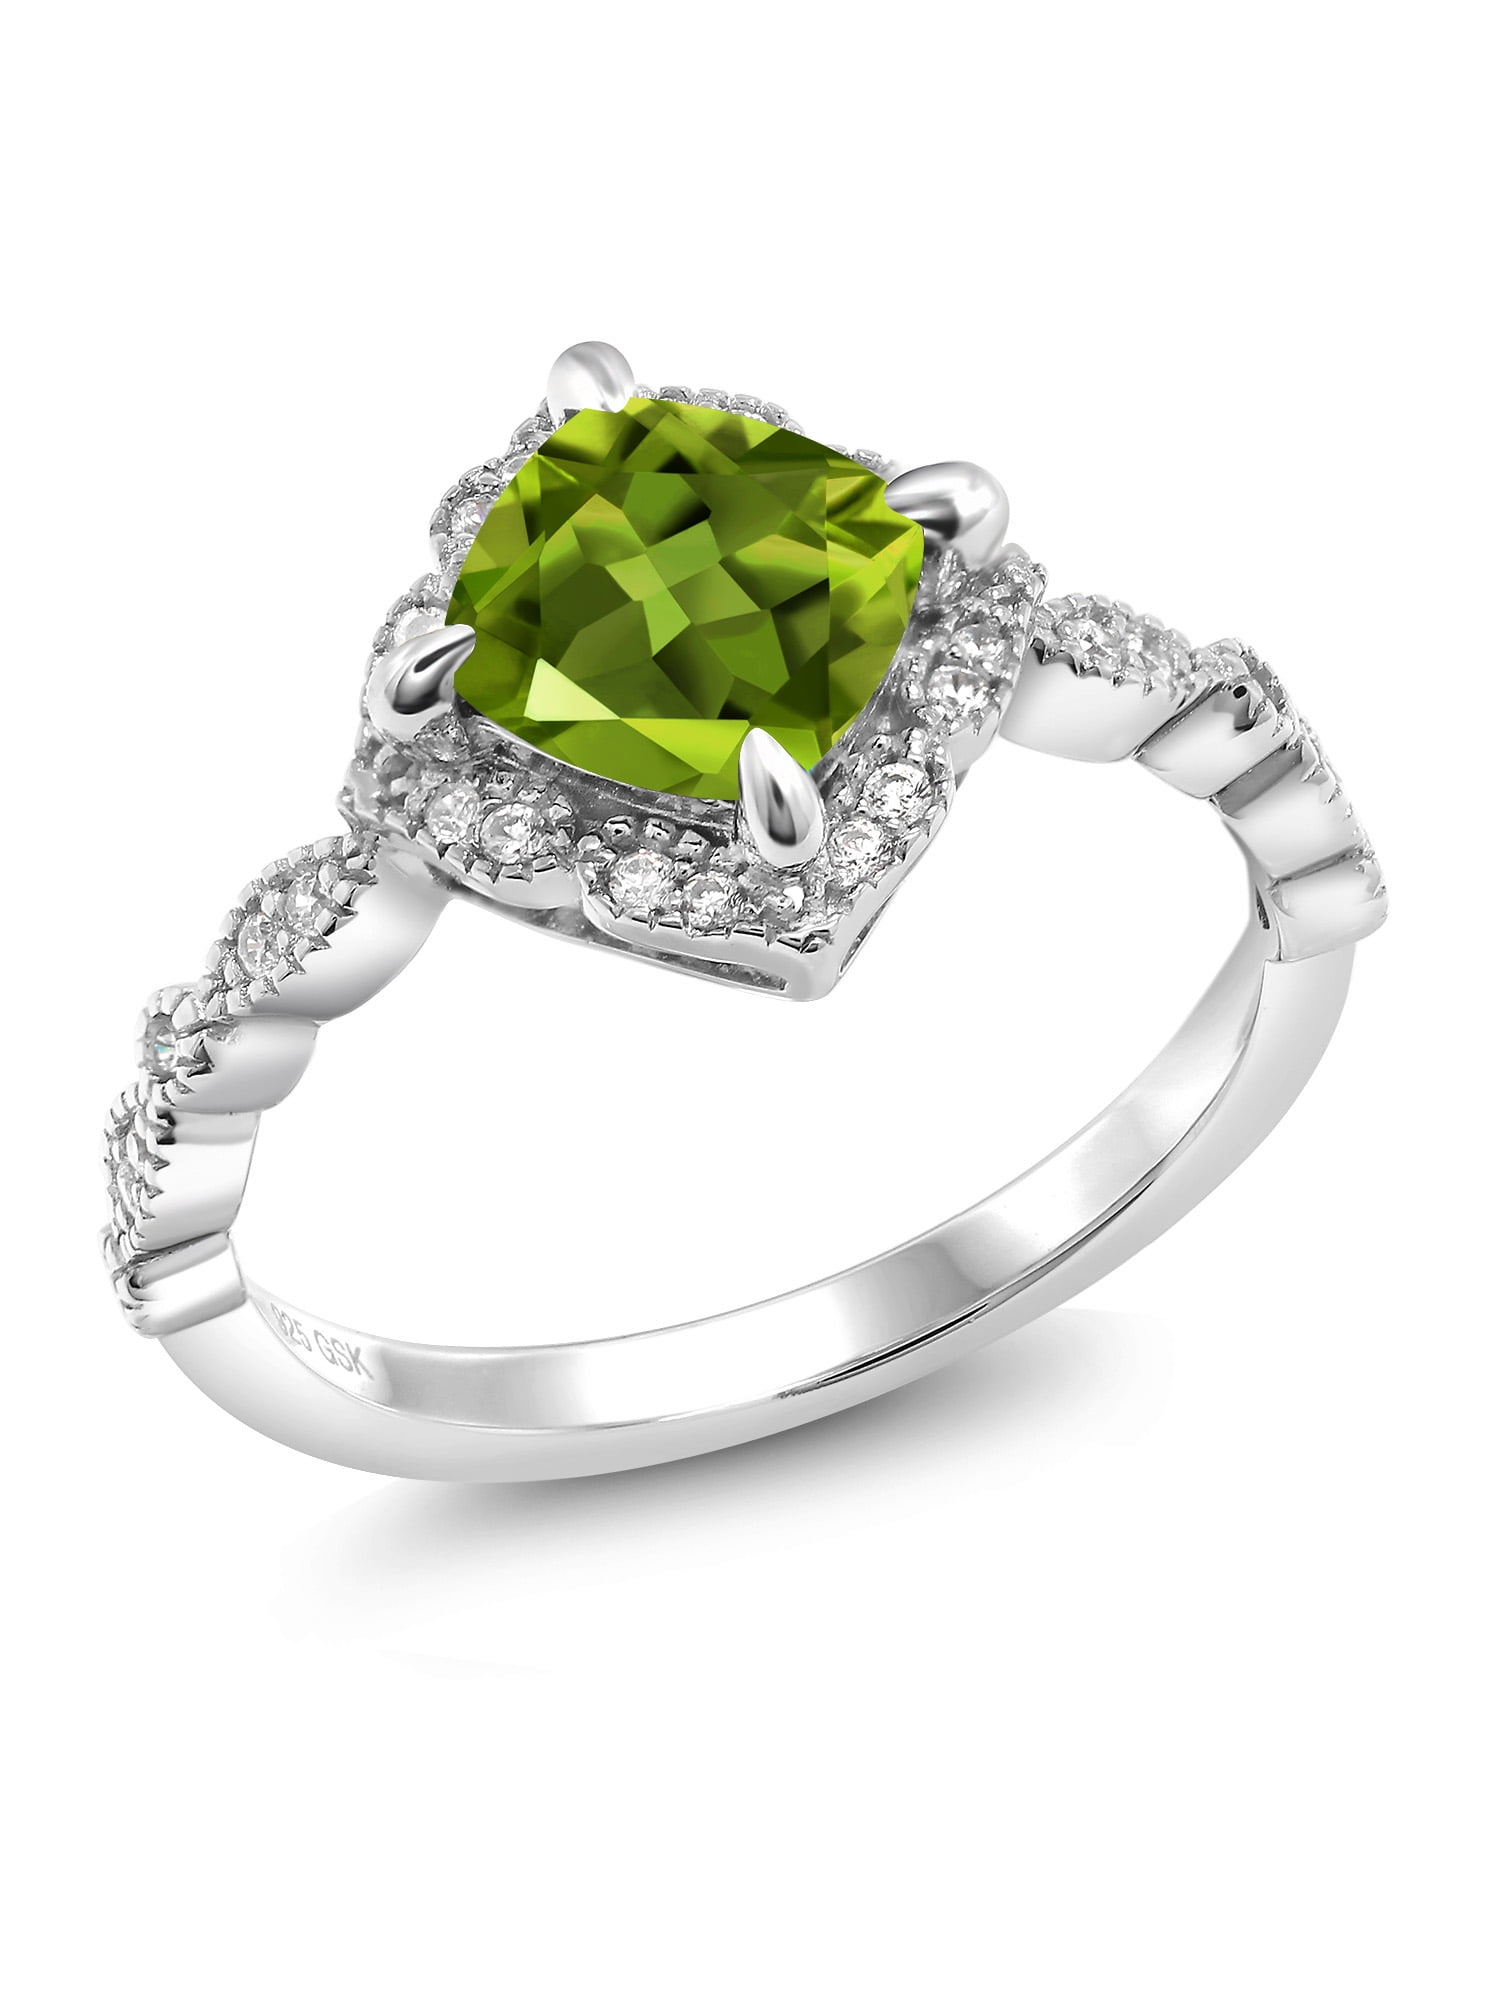 2.23Ct Oval Peridot & Diamond Criss Cross Women's Ring With 10k White Gold Over 